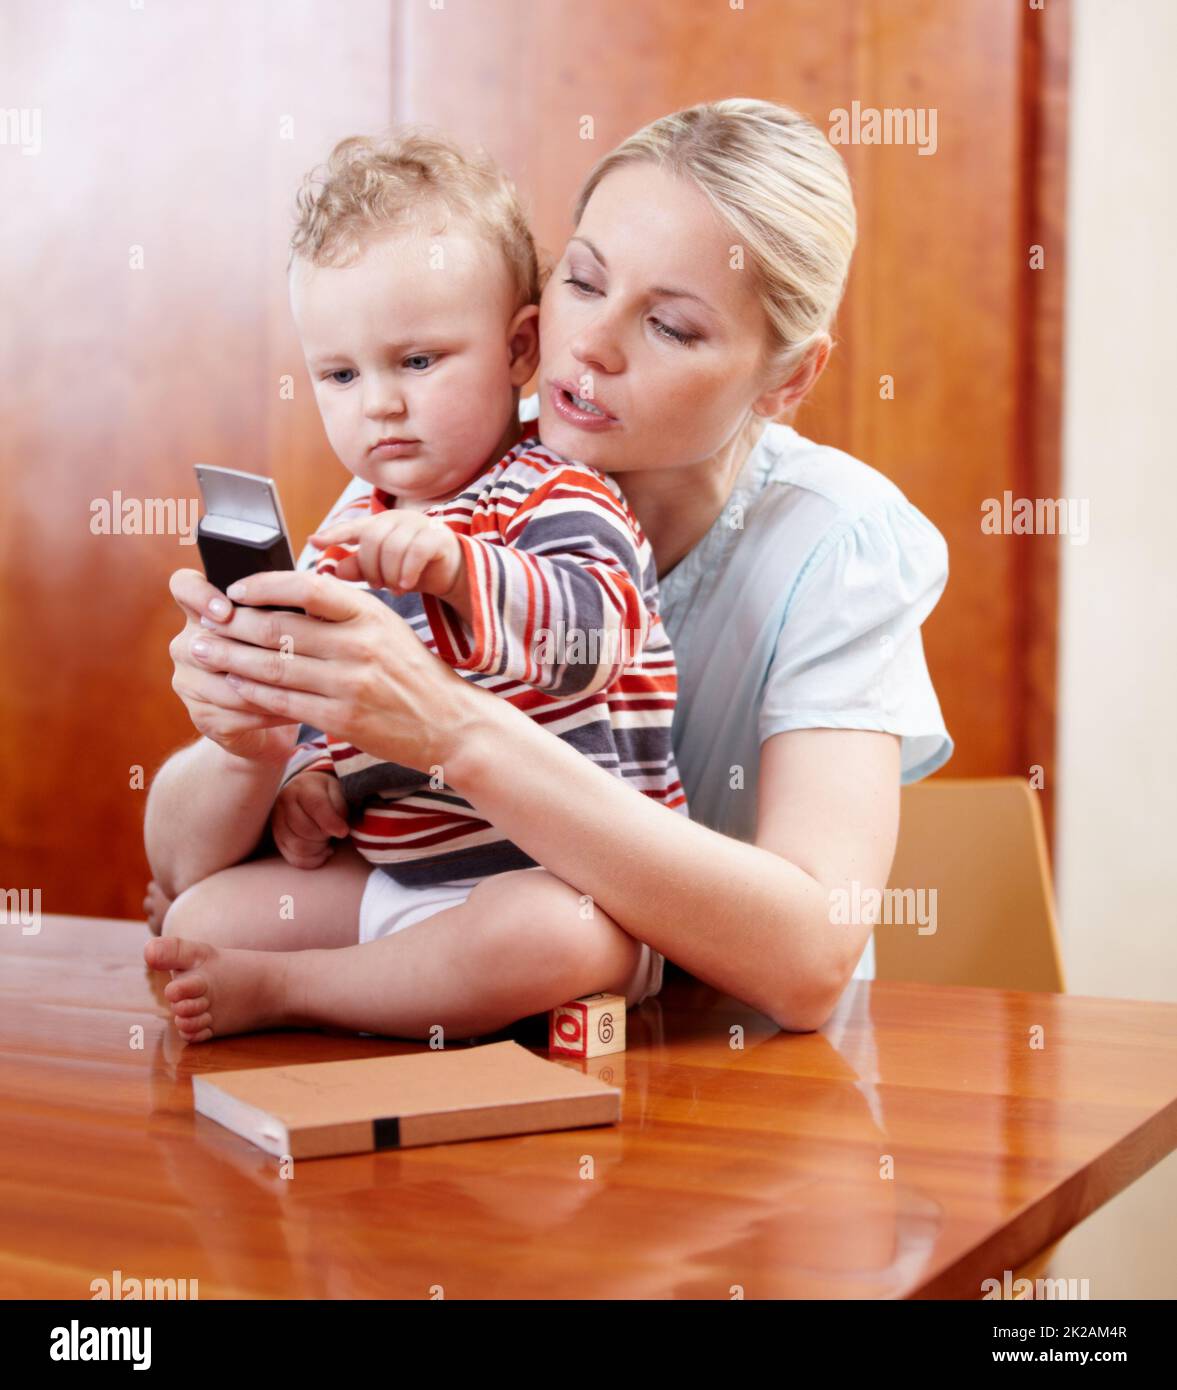 Eager to communicate. A mother showing her child how a cellphone works. Stock Photo